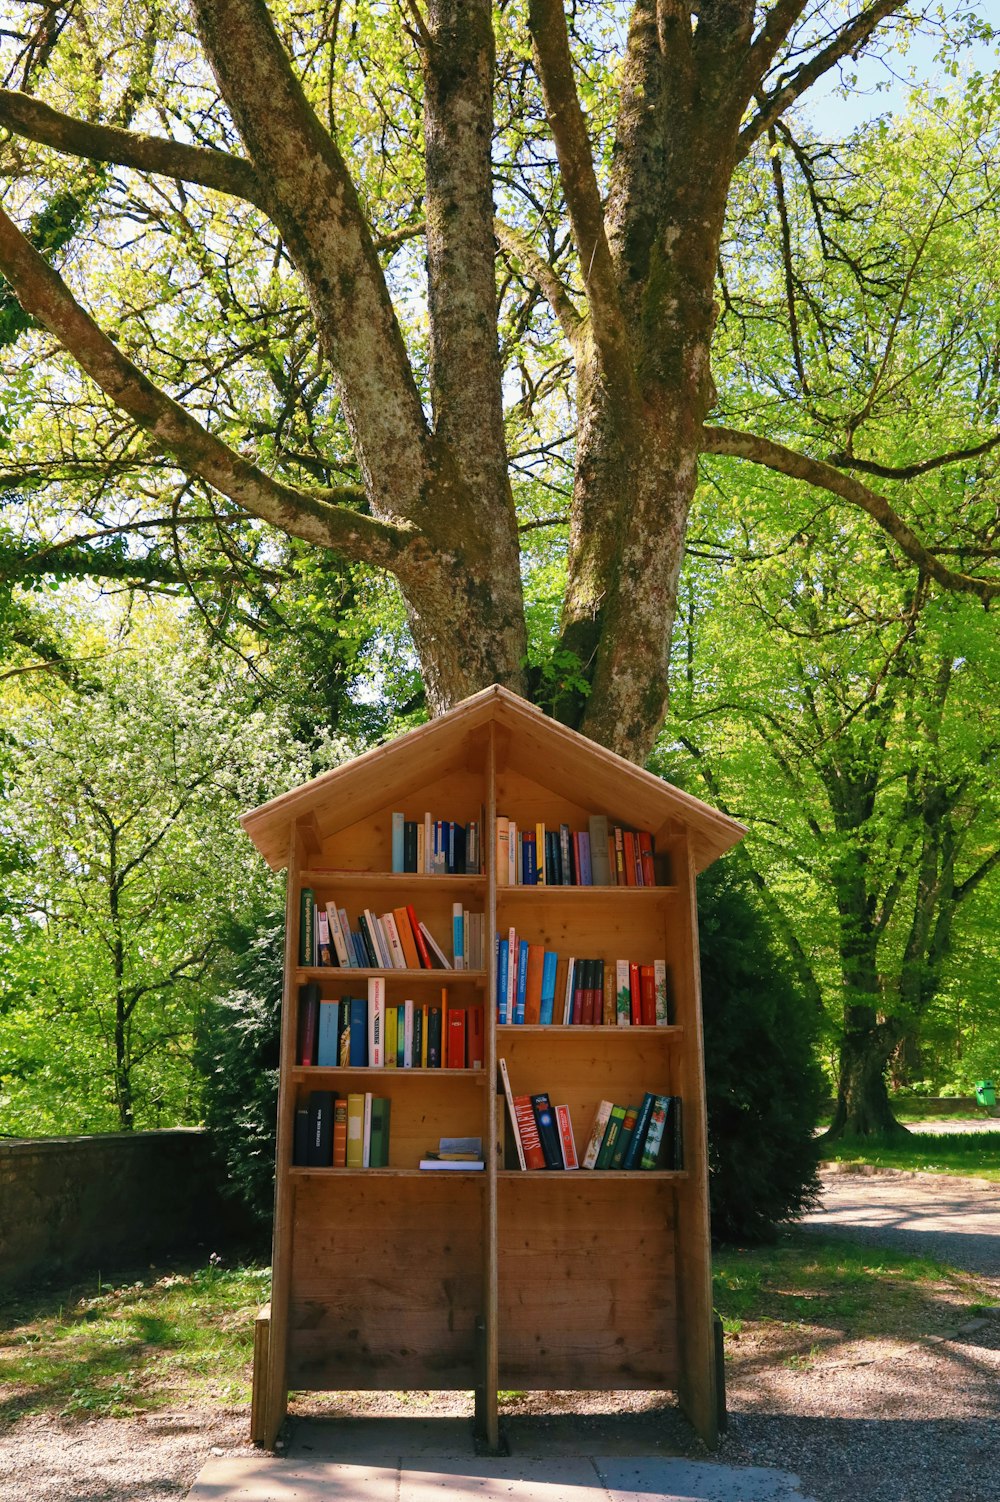 a bookshelf in the shape of a tree in a park